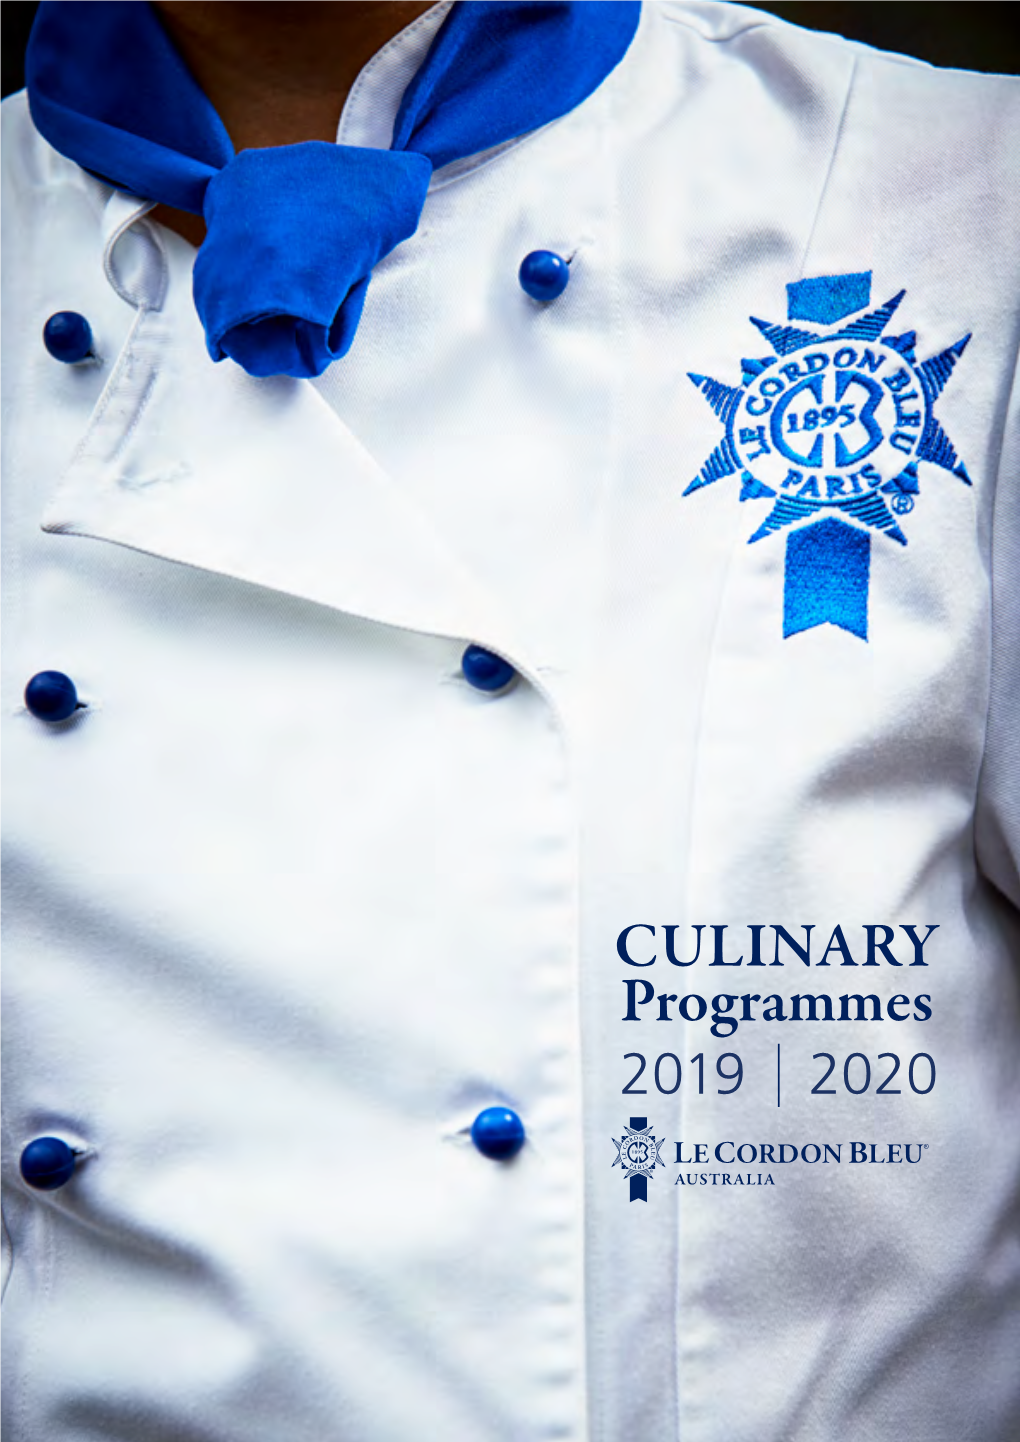 CULINARY Programmes 2019 2020 FIND YOUR PERFECT CAREER TABLE of CONTENTS